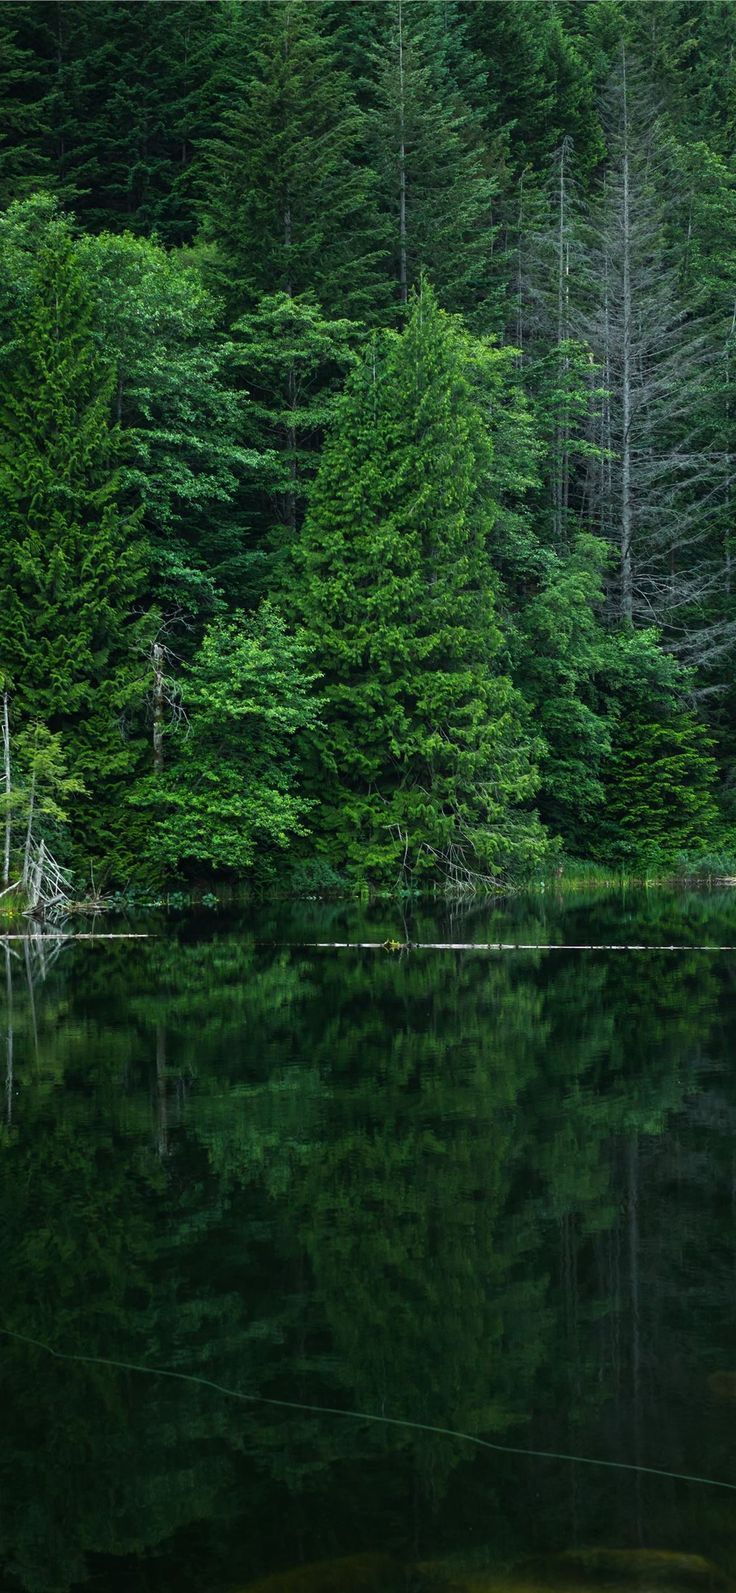 grey calm body of water near green leaf trees at d. #tree #forest #nature #landscape #Canada #iPhoneXWallpaper. Conceptual photography, Forest picture, Water